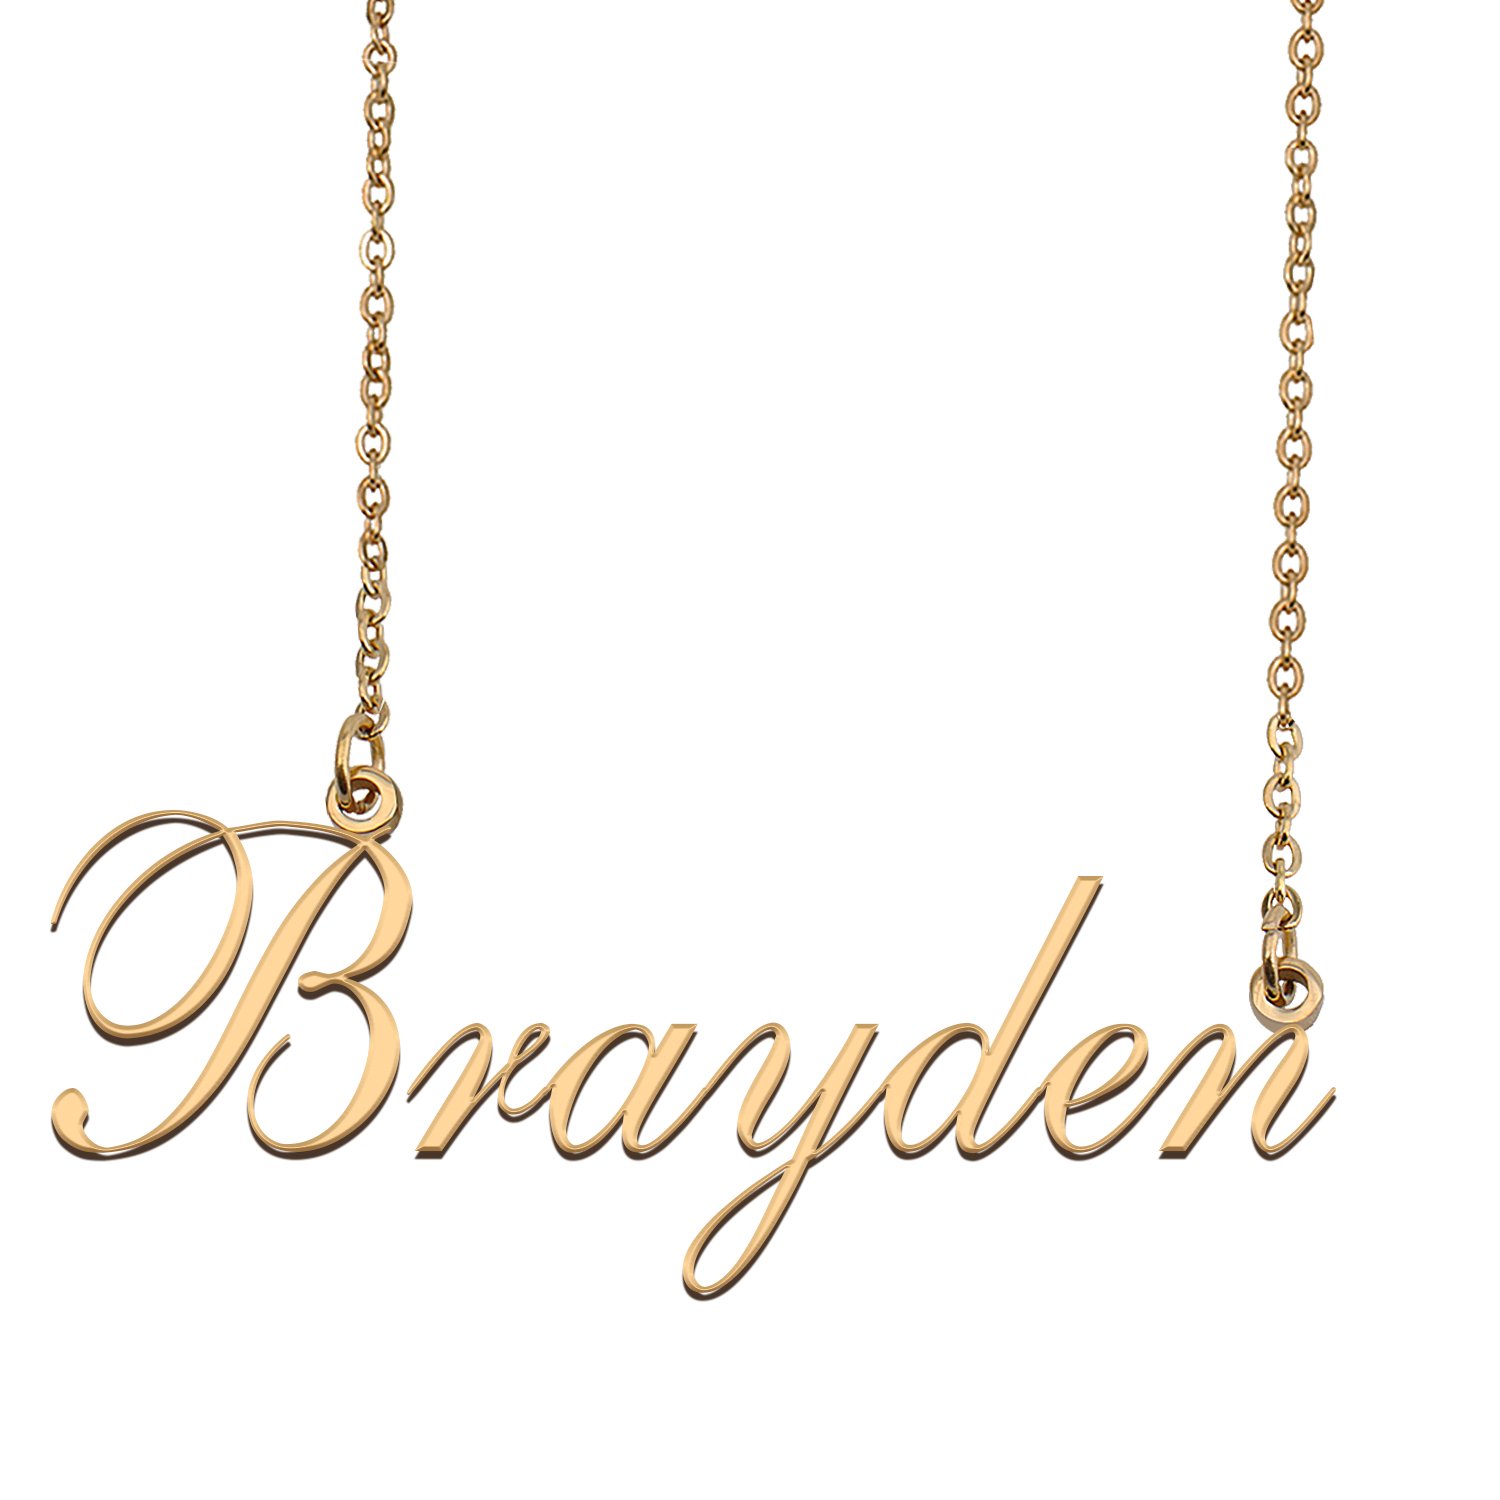 Custom Nameplate Necklace Personalized Jewelry Gifts for Women Brayden